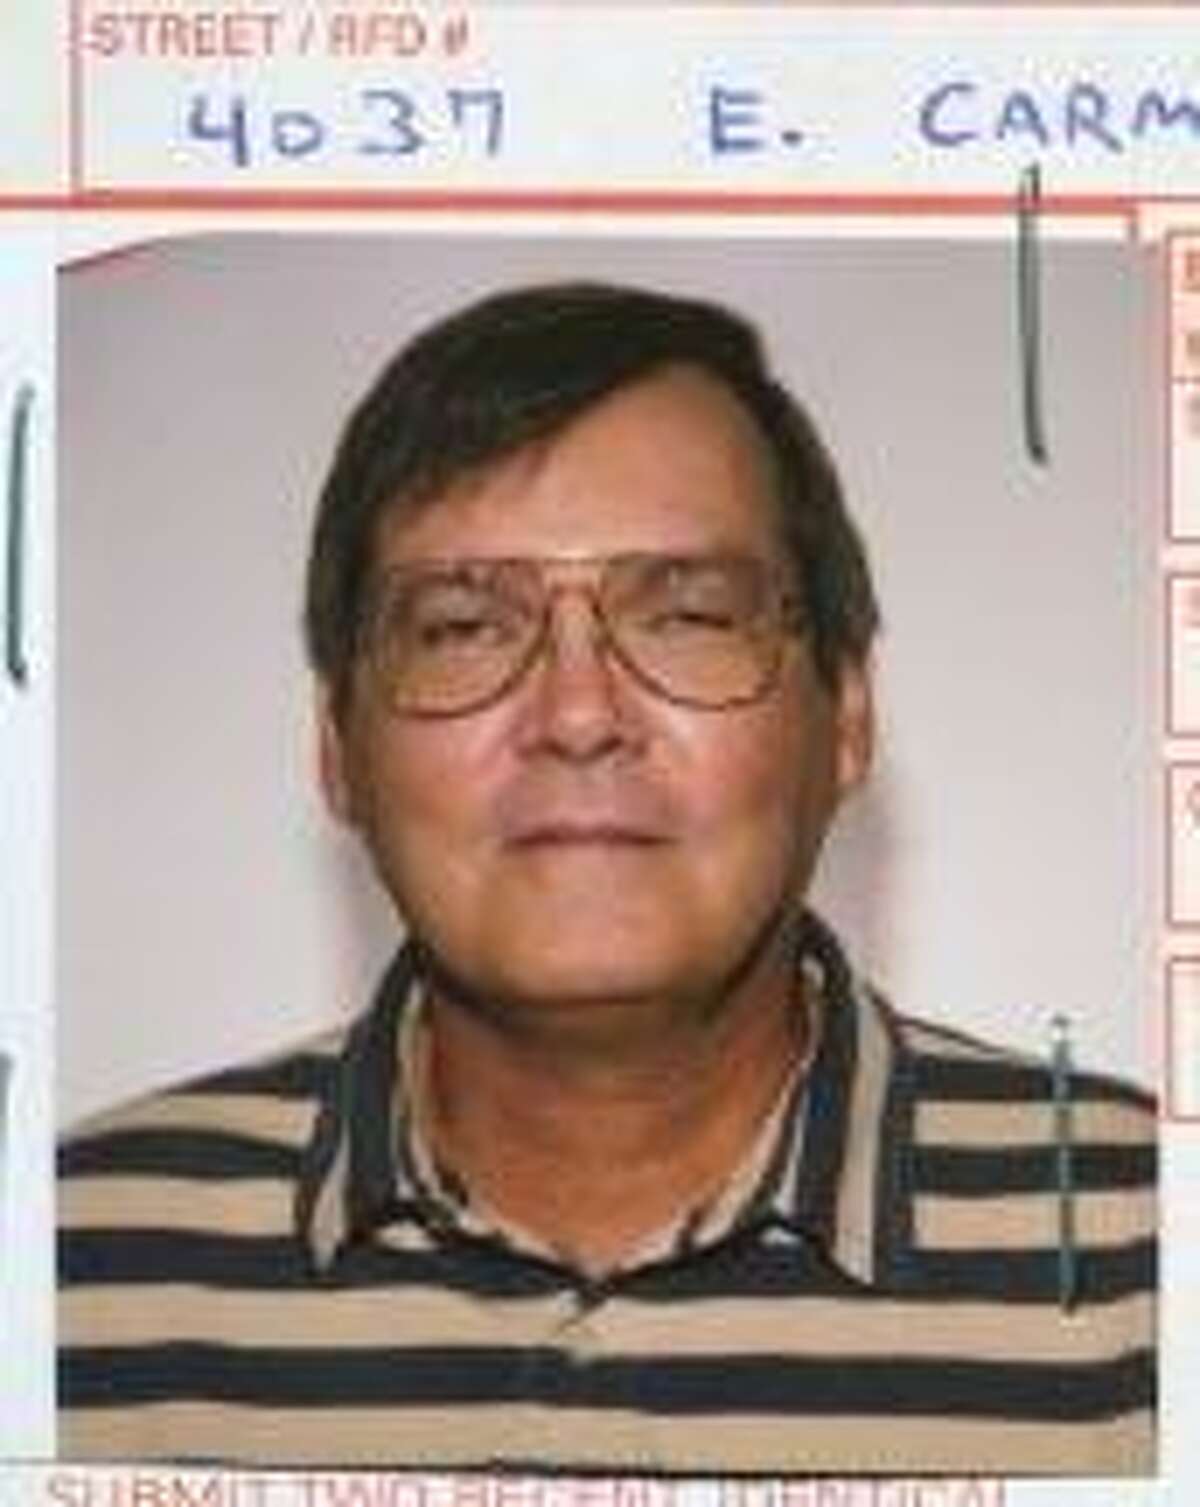 The Houston FBI is leading a global search for victims of pedophile William James Vahey, shown here in 2004.